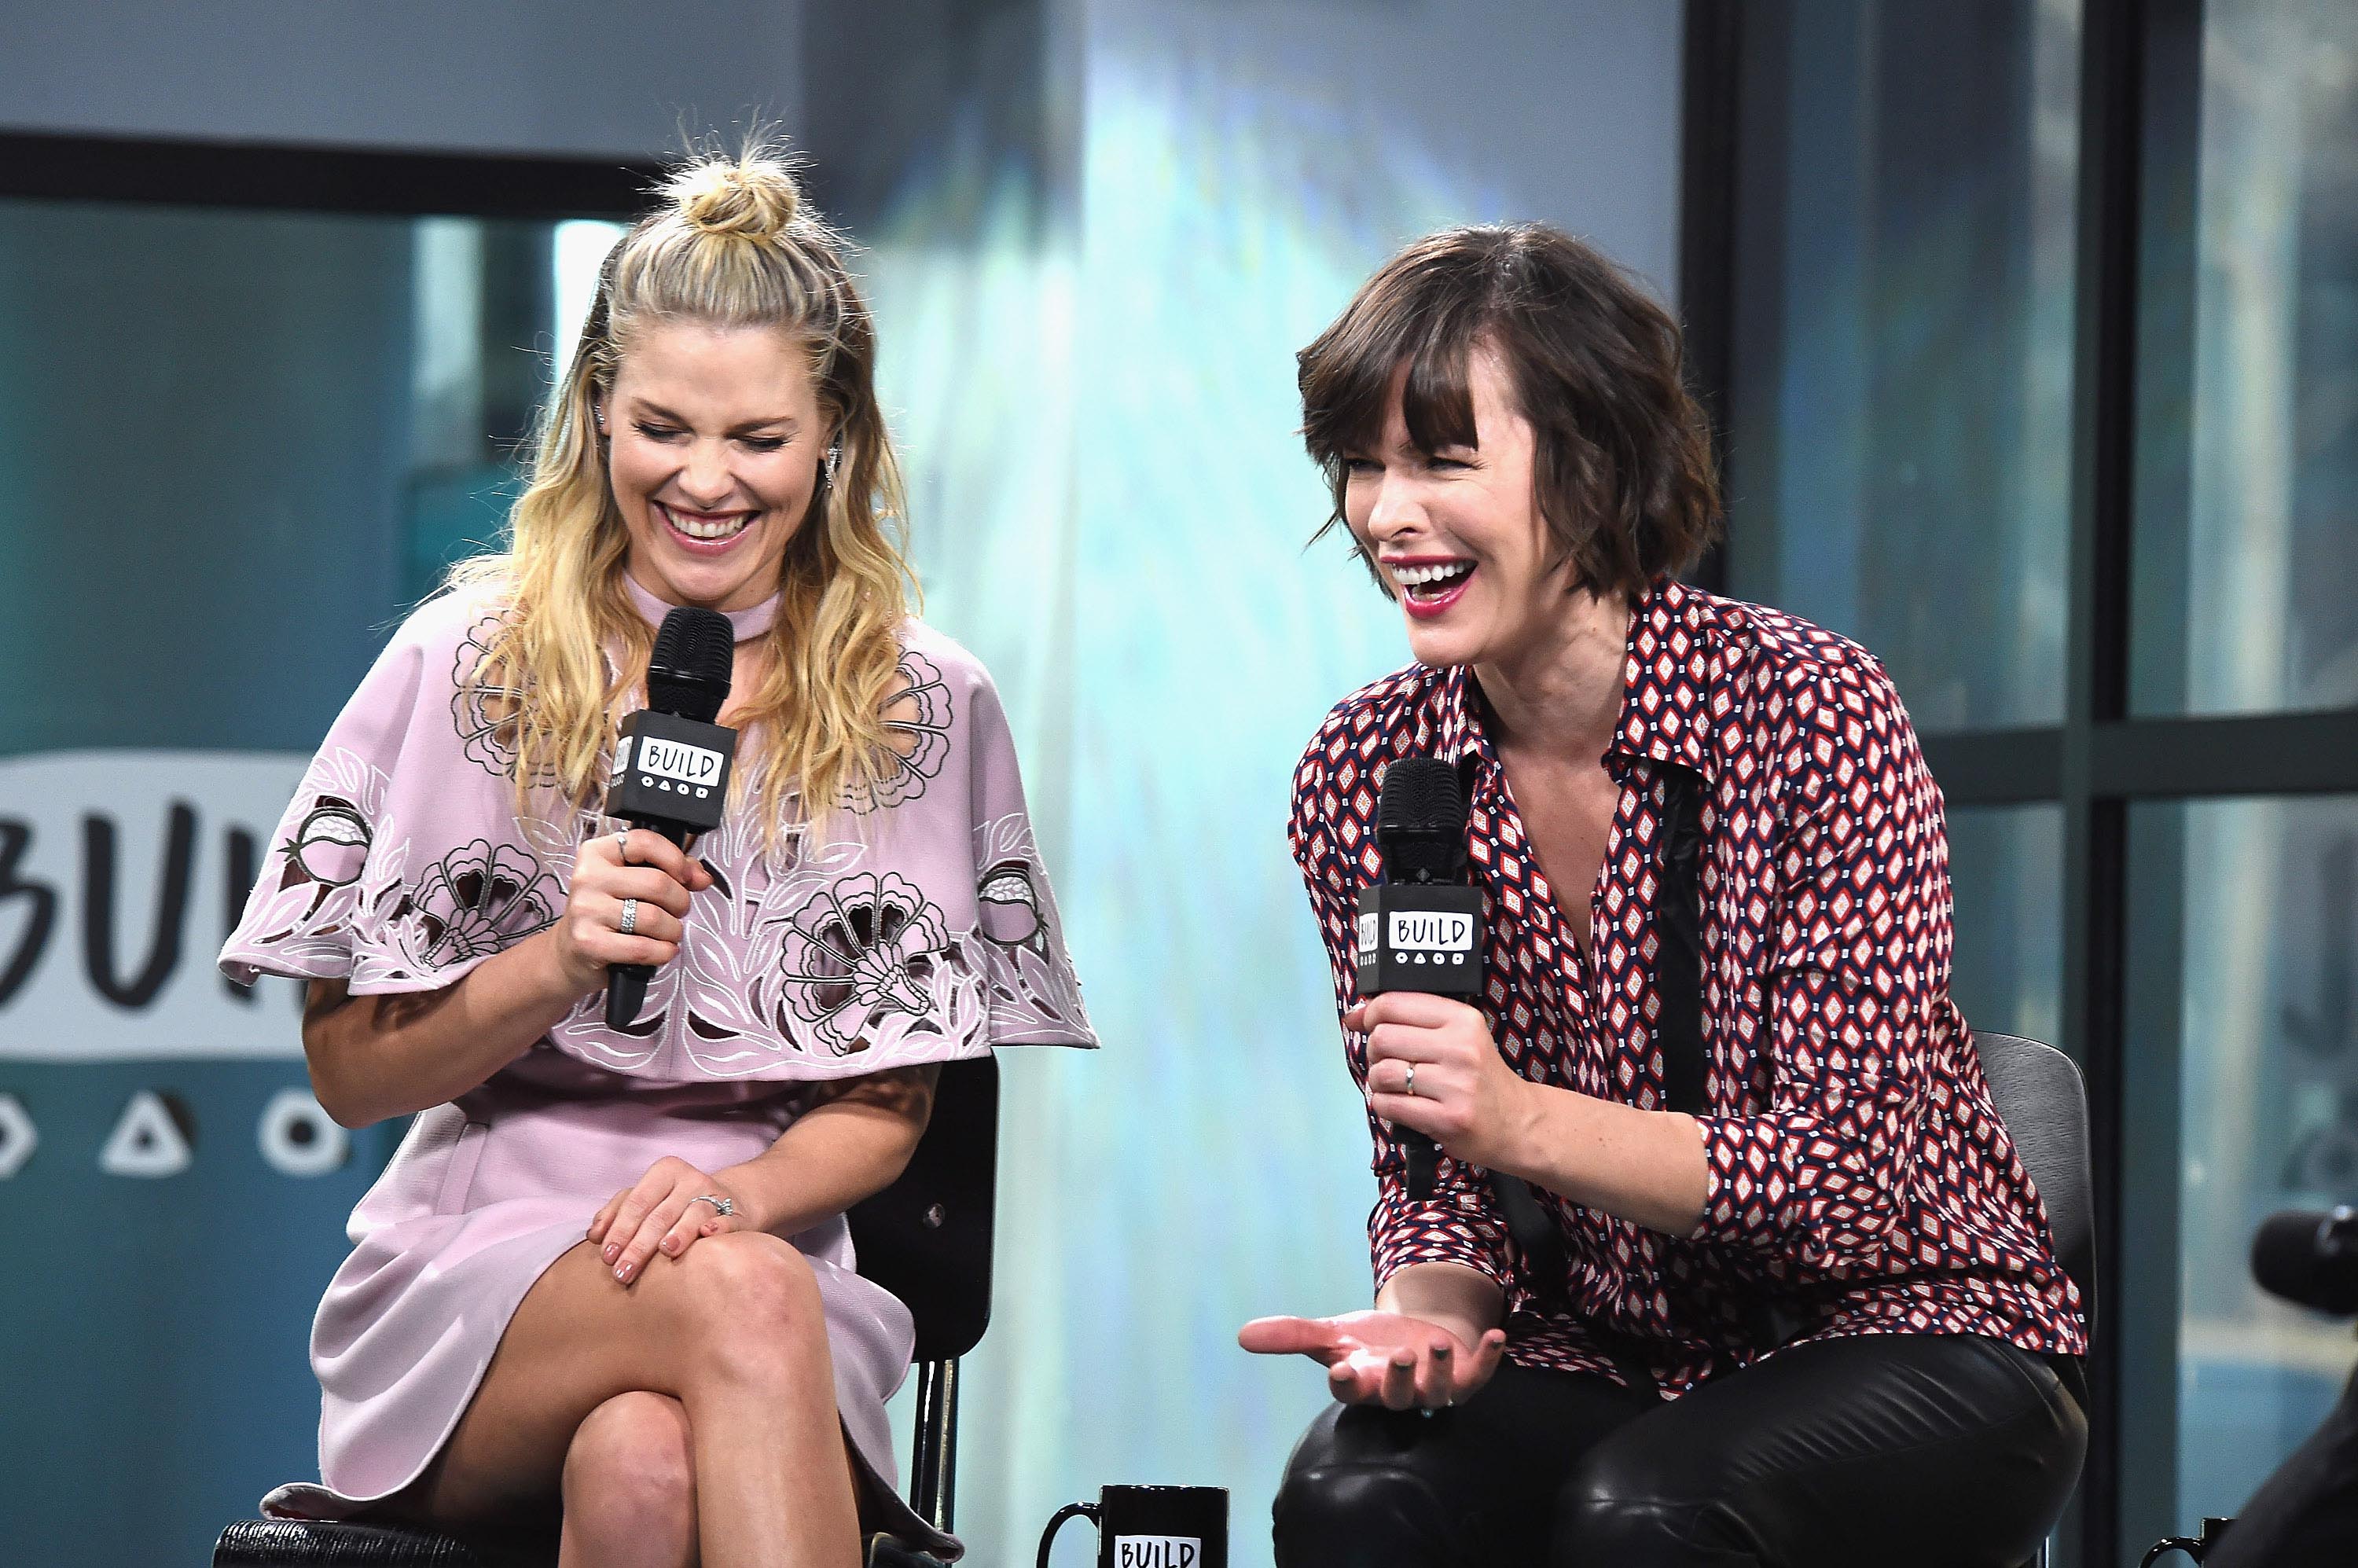 Milla Jovovich attends Build Series to discuss ‘Resident Evil: The Final Chapter’